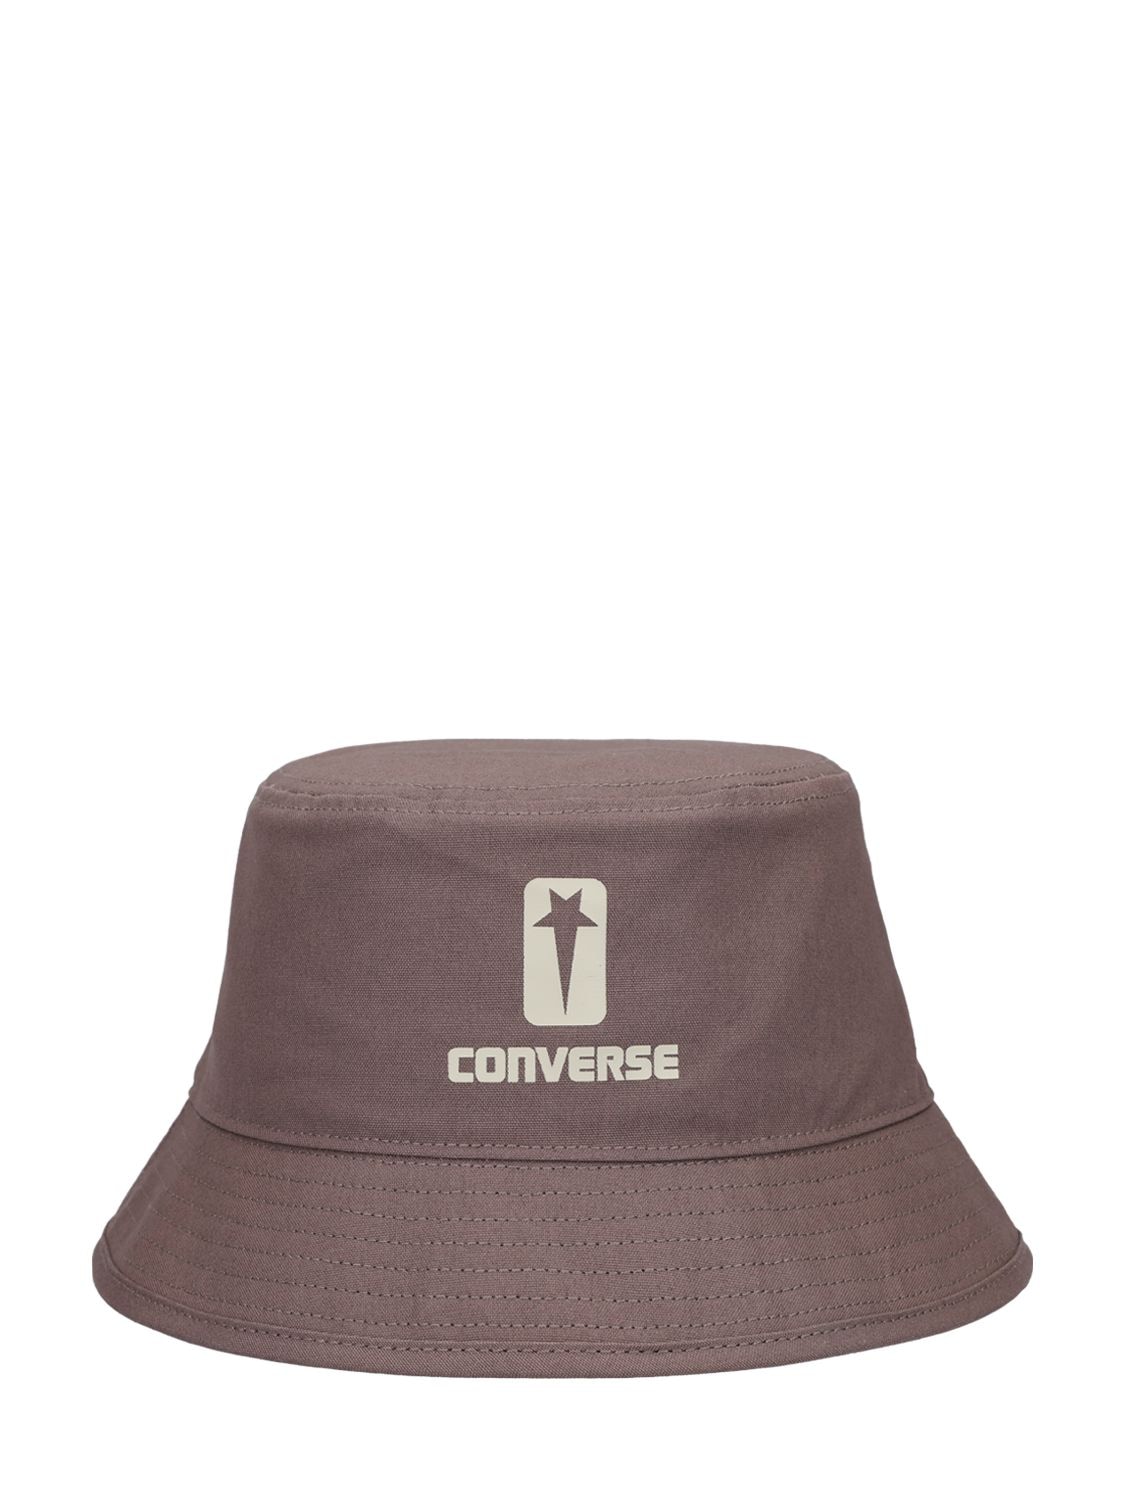 Drkshdw X Converse Converse Printed Cotton Bucket Hat In Dust